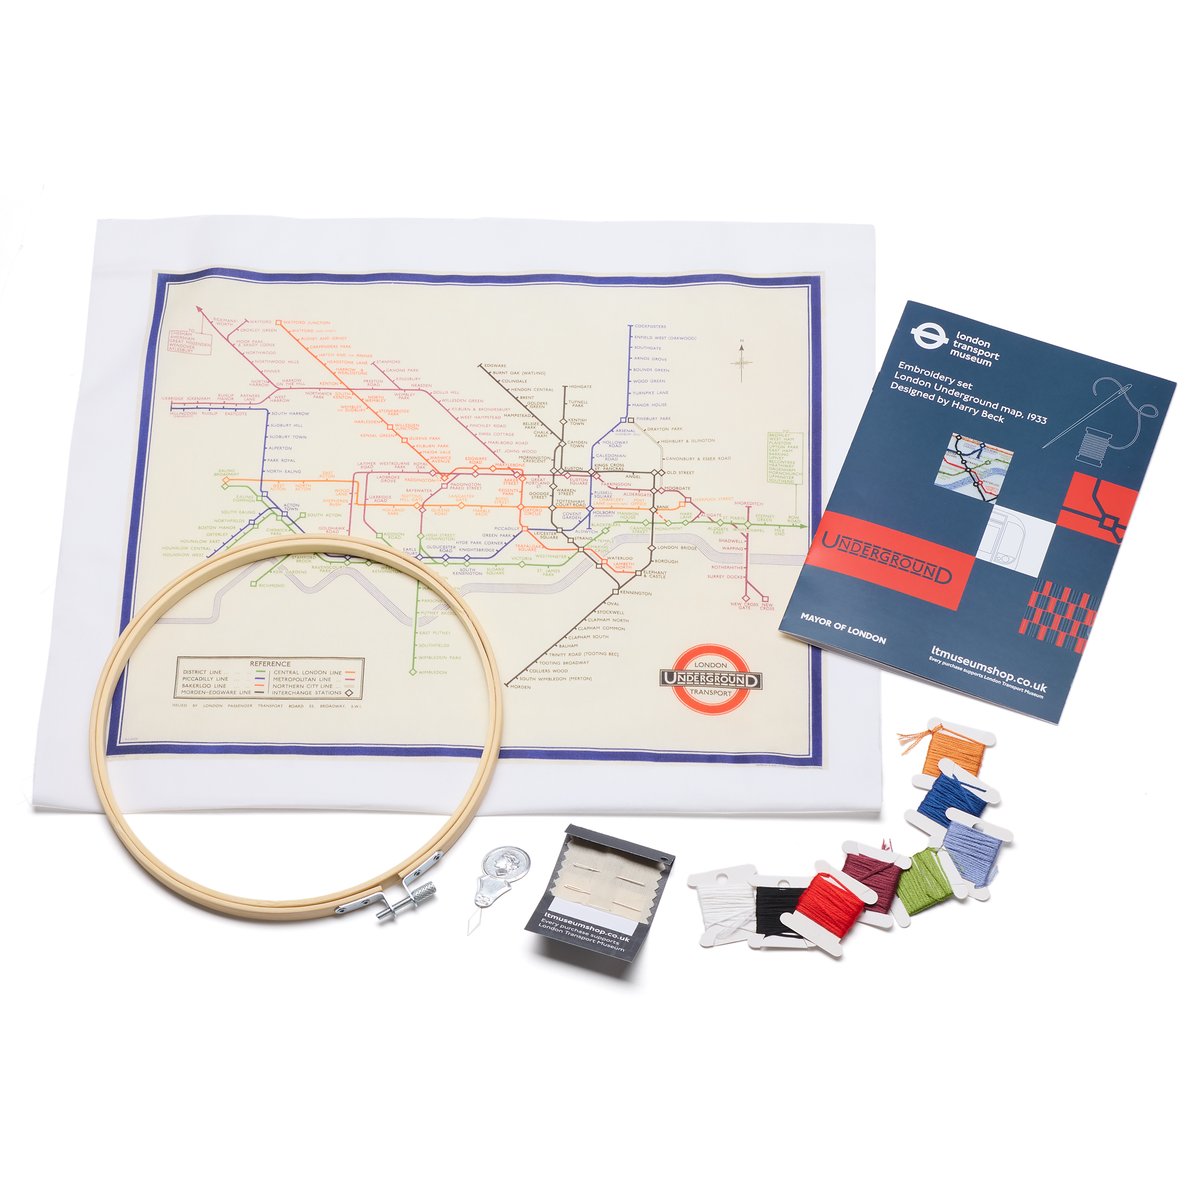 Sew your way round London with our new Tube map embroidery set! Recreate Harry Beck's iconic 1933 map while trying new stitching techniques from chain stitch to Portuguese knotted stem stitch, with a different type of stitch used for each Underground line ltmuseumshop.co.uk/embroidery-kit…